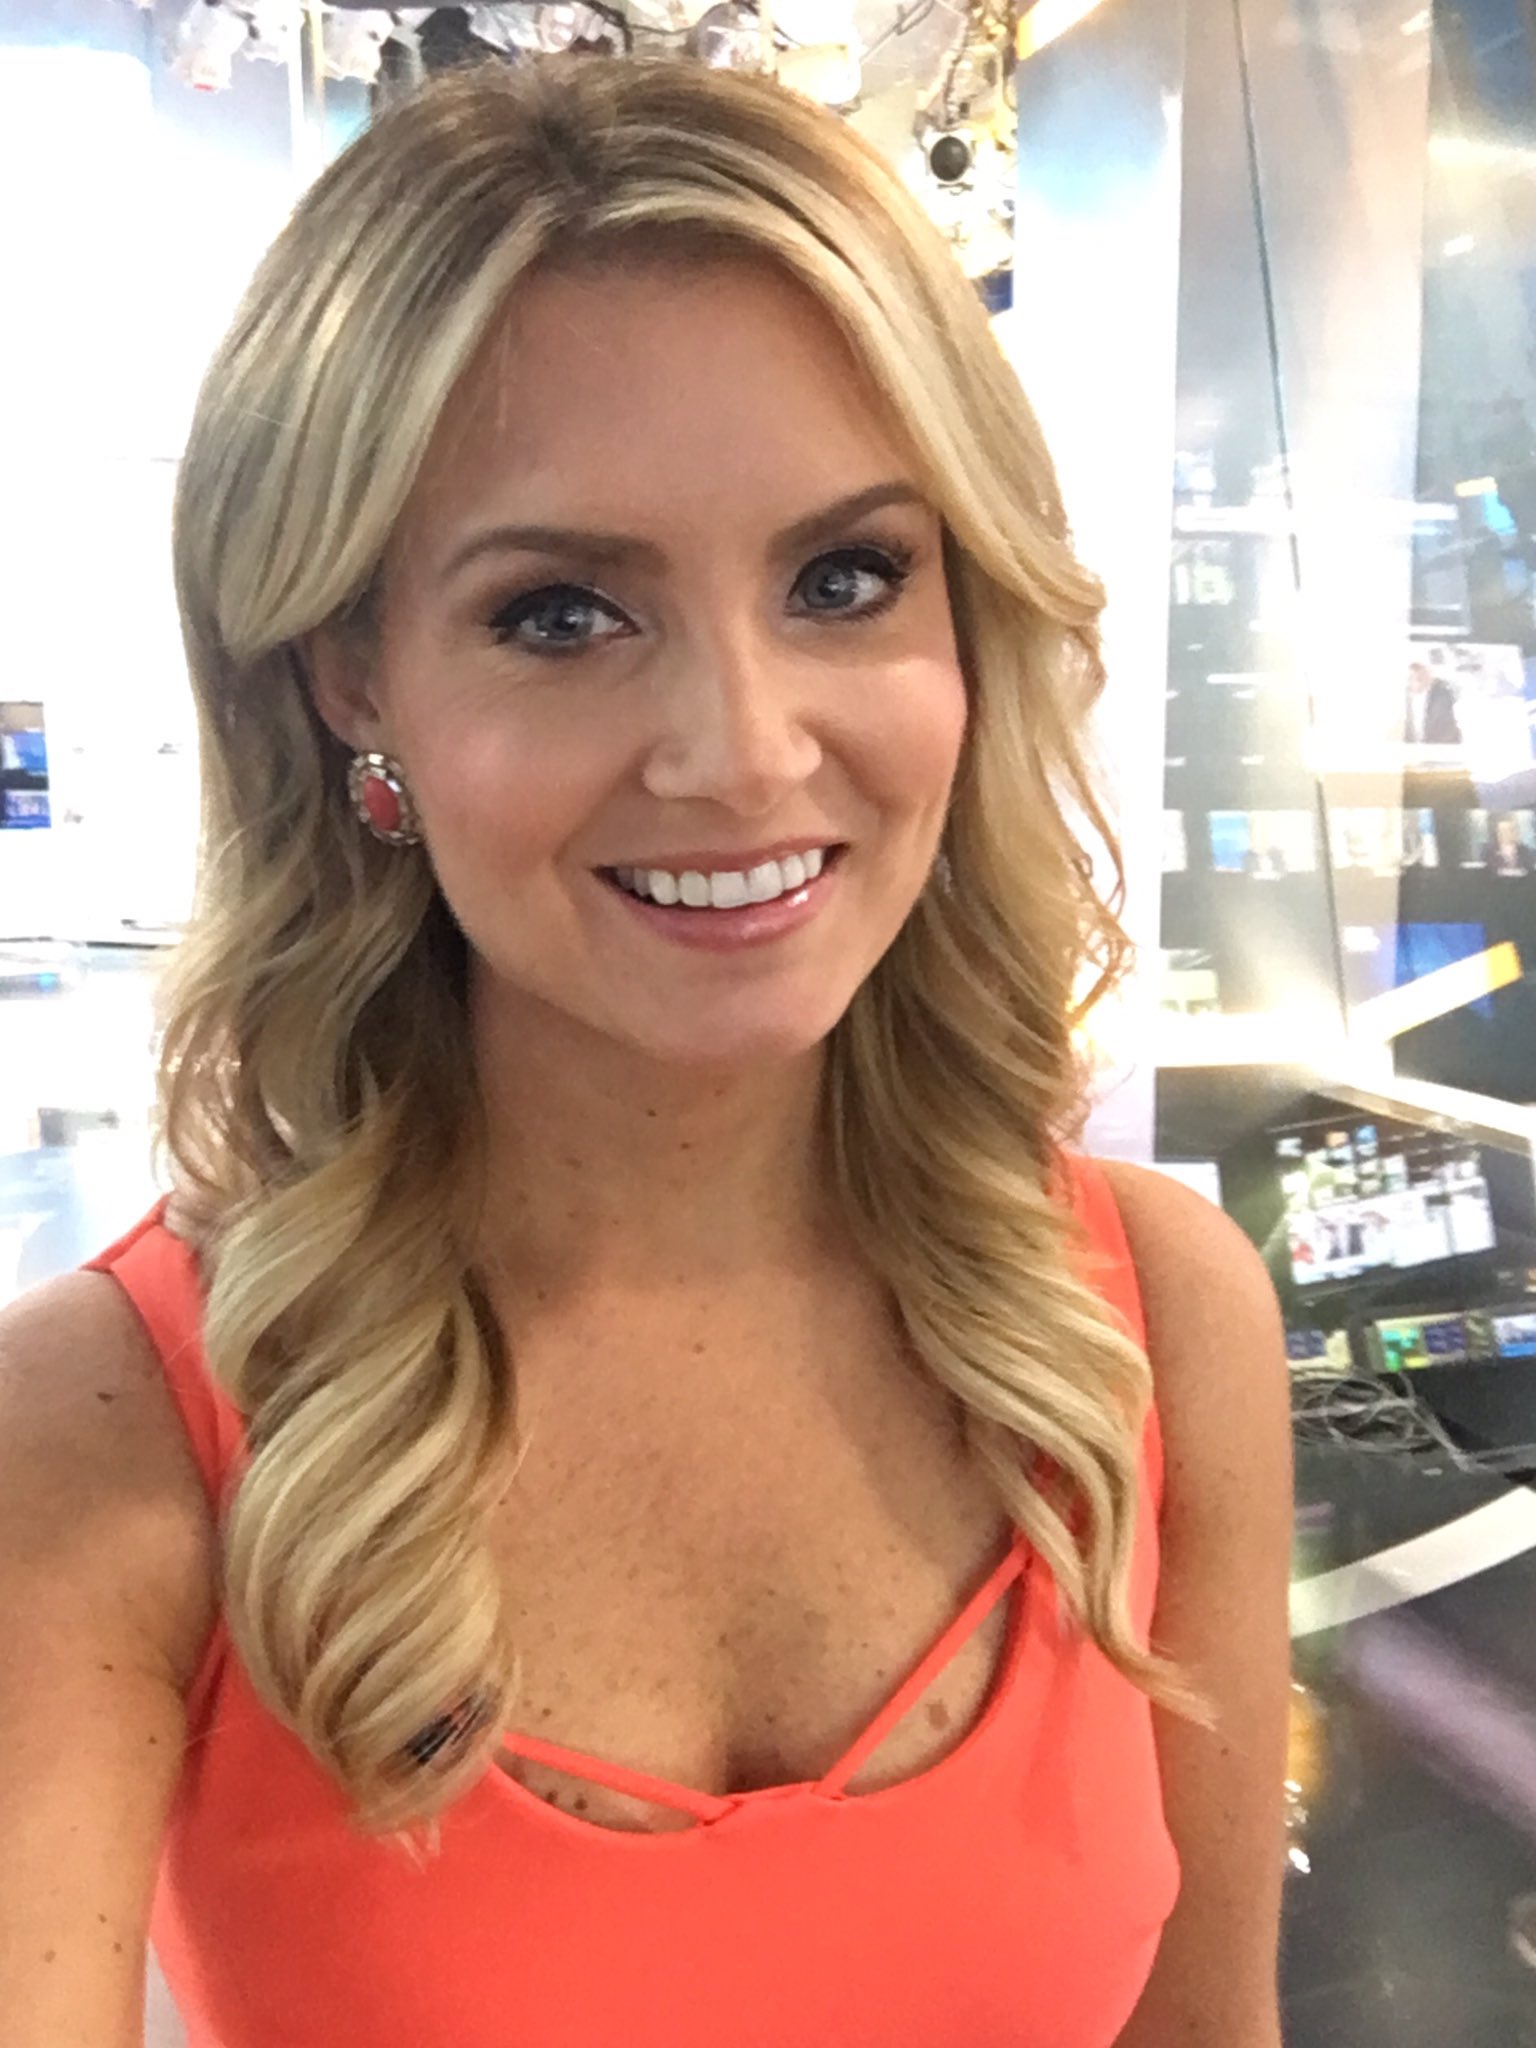 Jillian Mele on Twitter: "A lot of people have commented on my red dress today, but it's not red ...